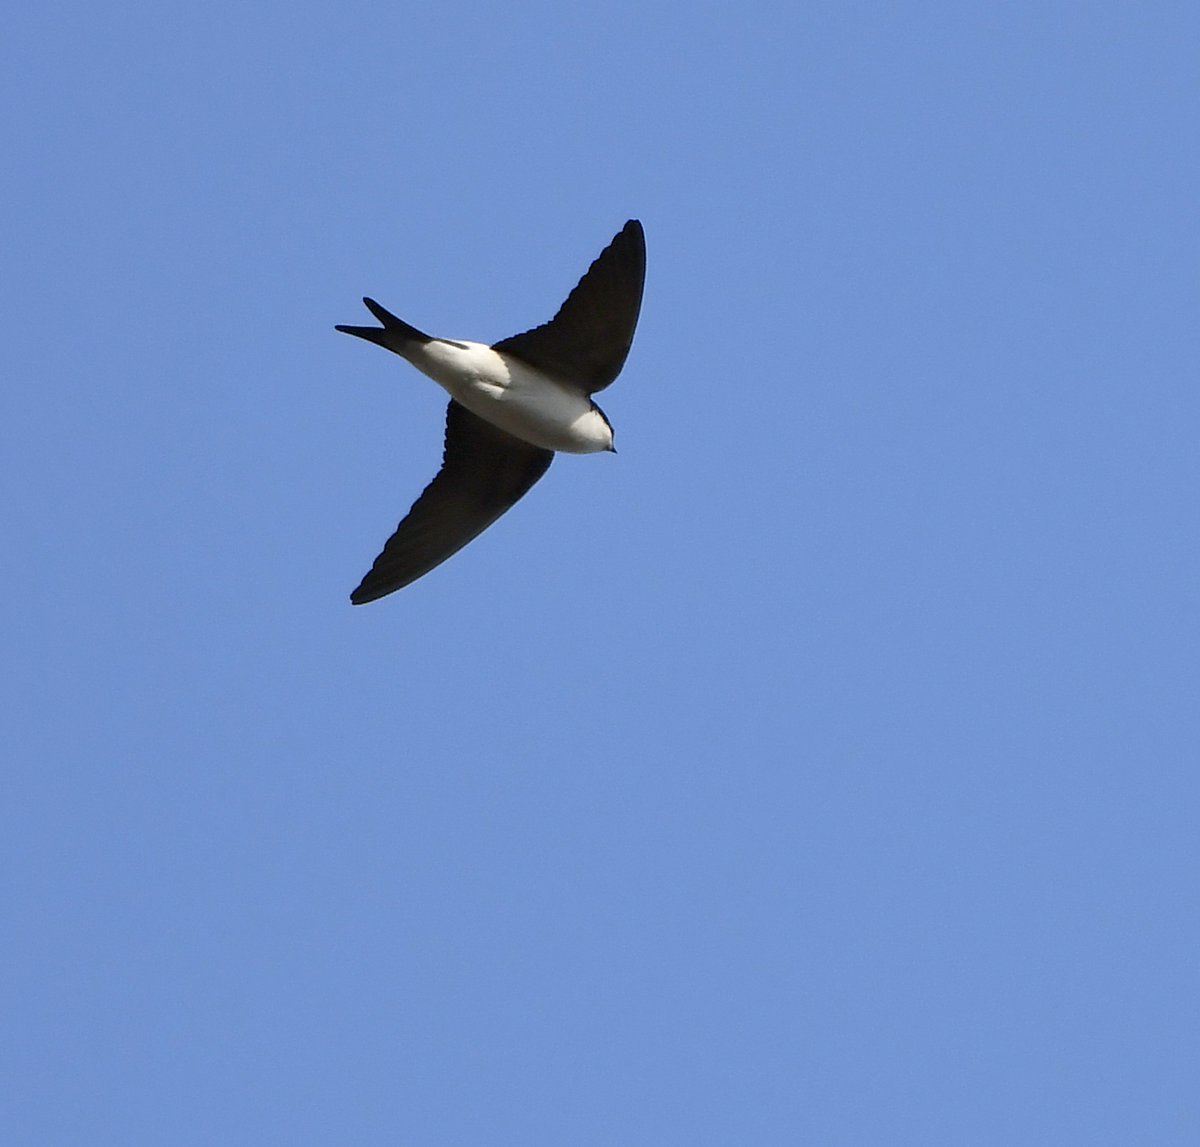 21. House Martin Fantastic that these birds are starting to arrive again! Taken from my garden 5 days ago. #LockdownGardenBirdsSeen 